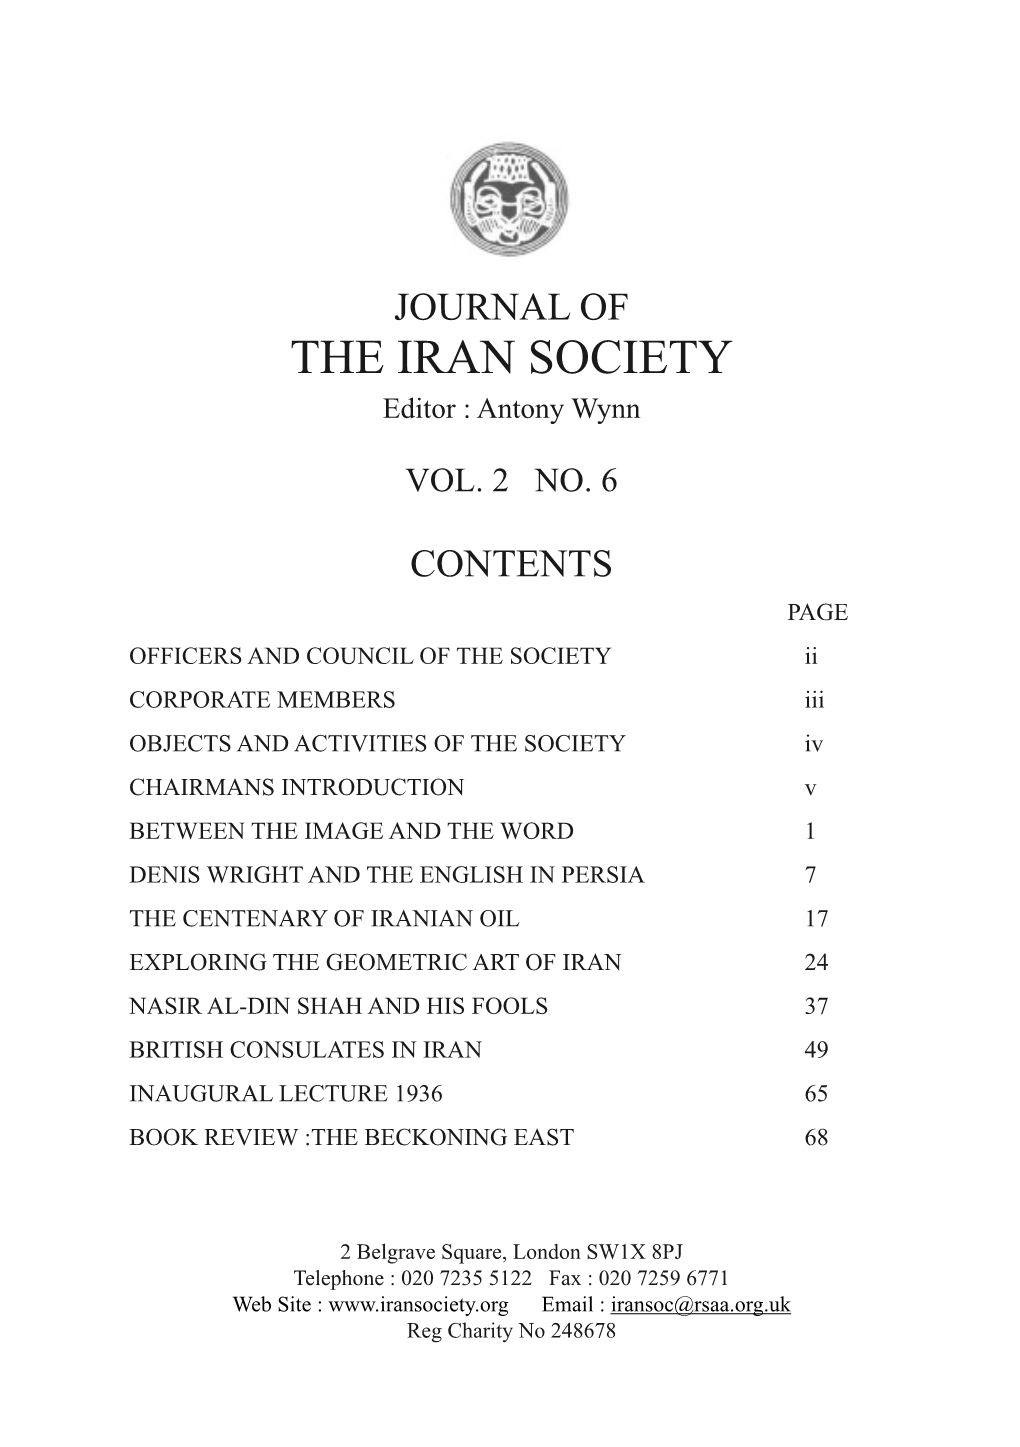 Download the 2007 Journal